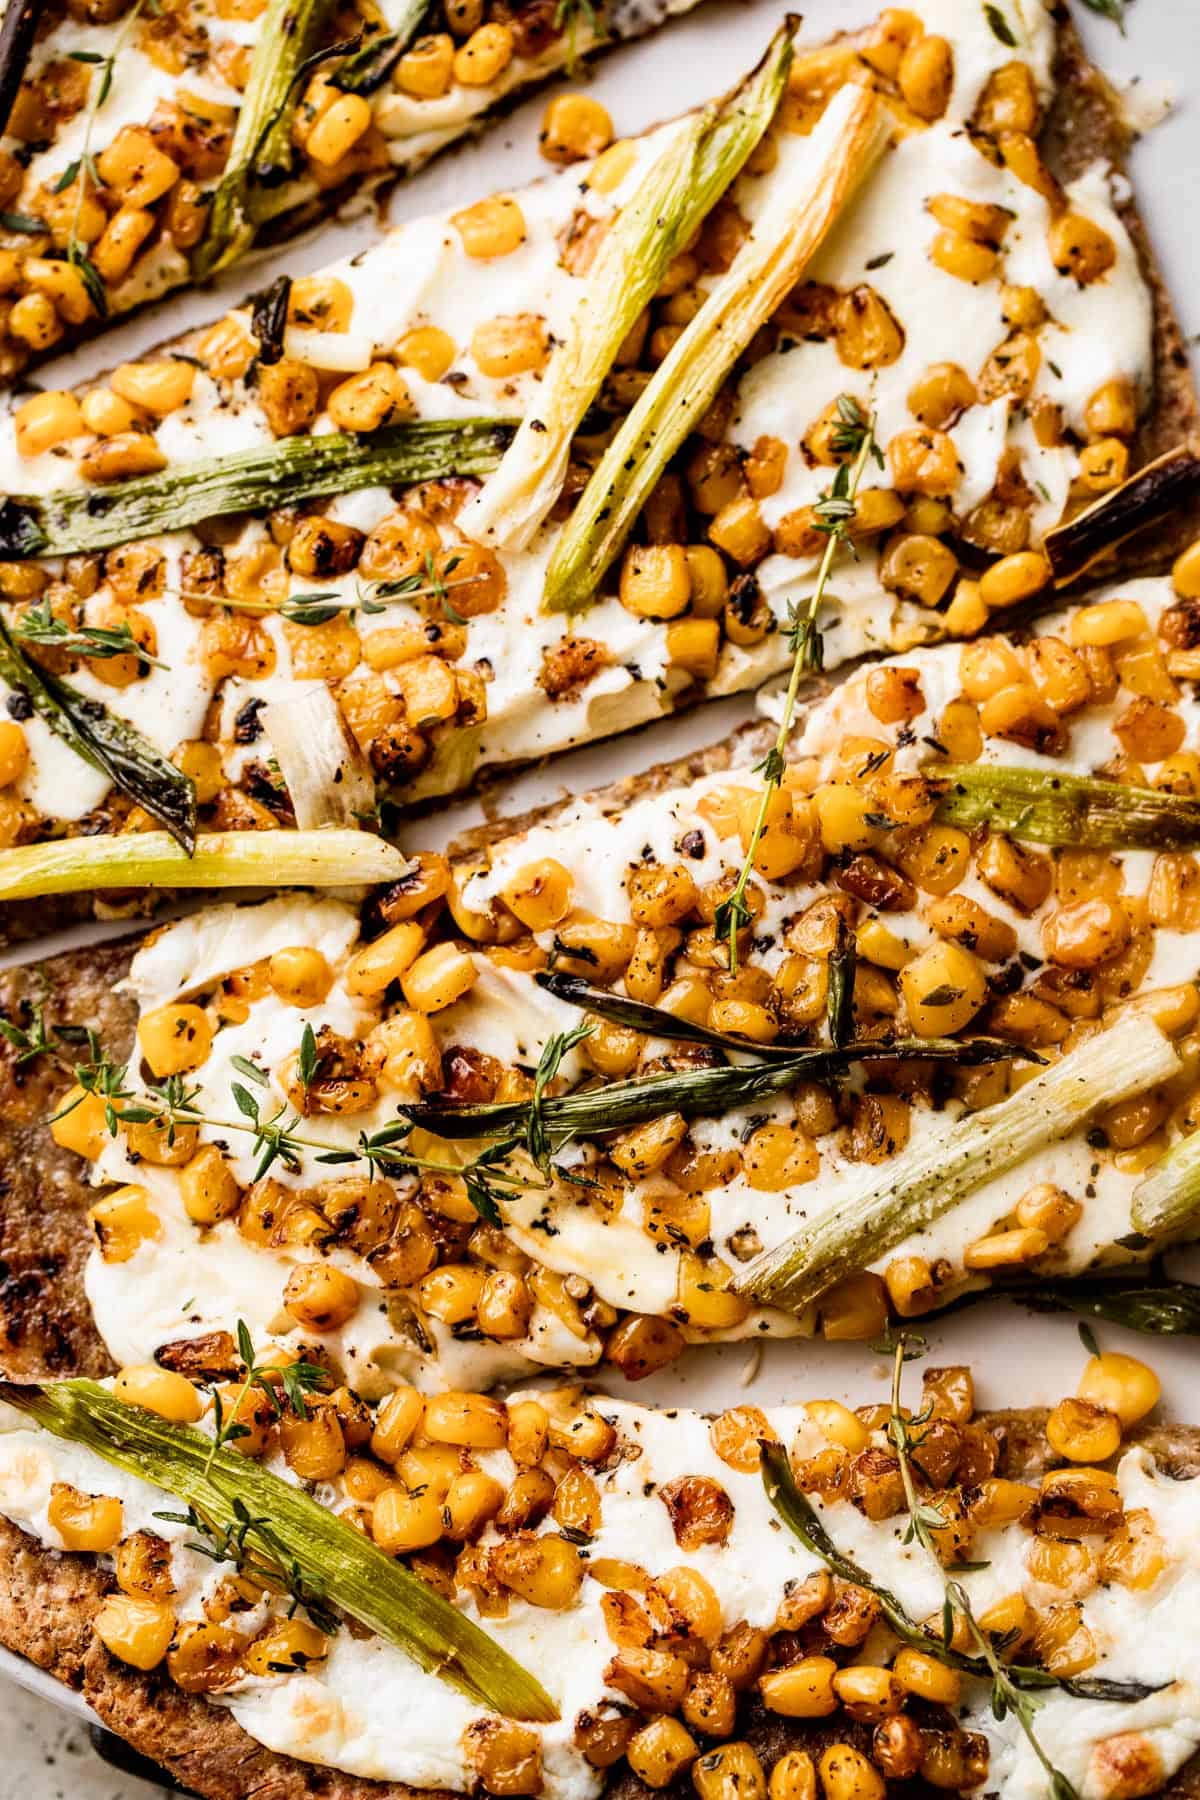 up close shot of grilled flatbread pizza topped with melted mozzarella, grilled corn kernels, and halved green onions scattered on top.